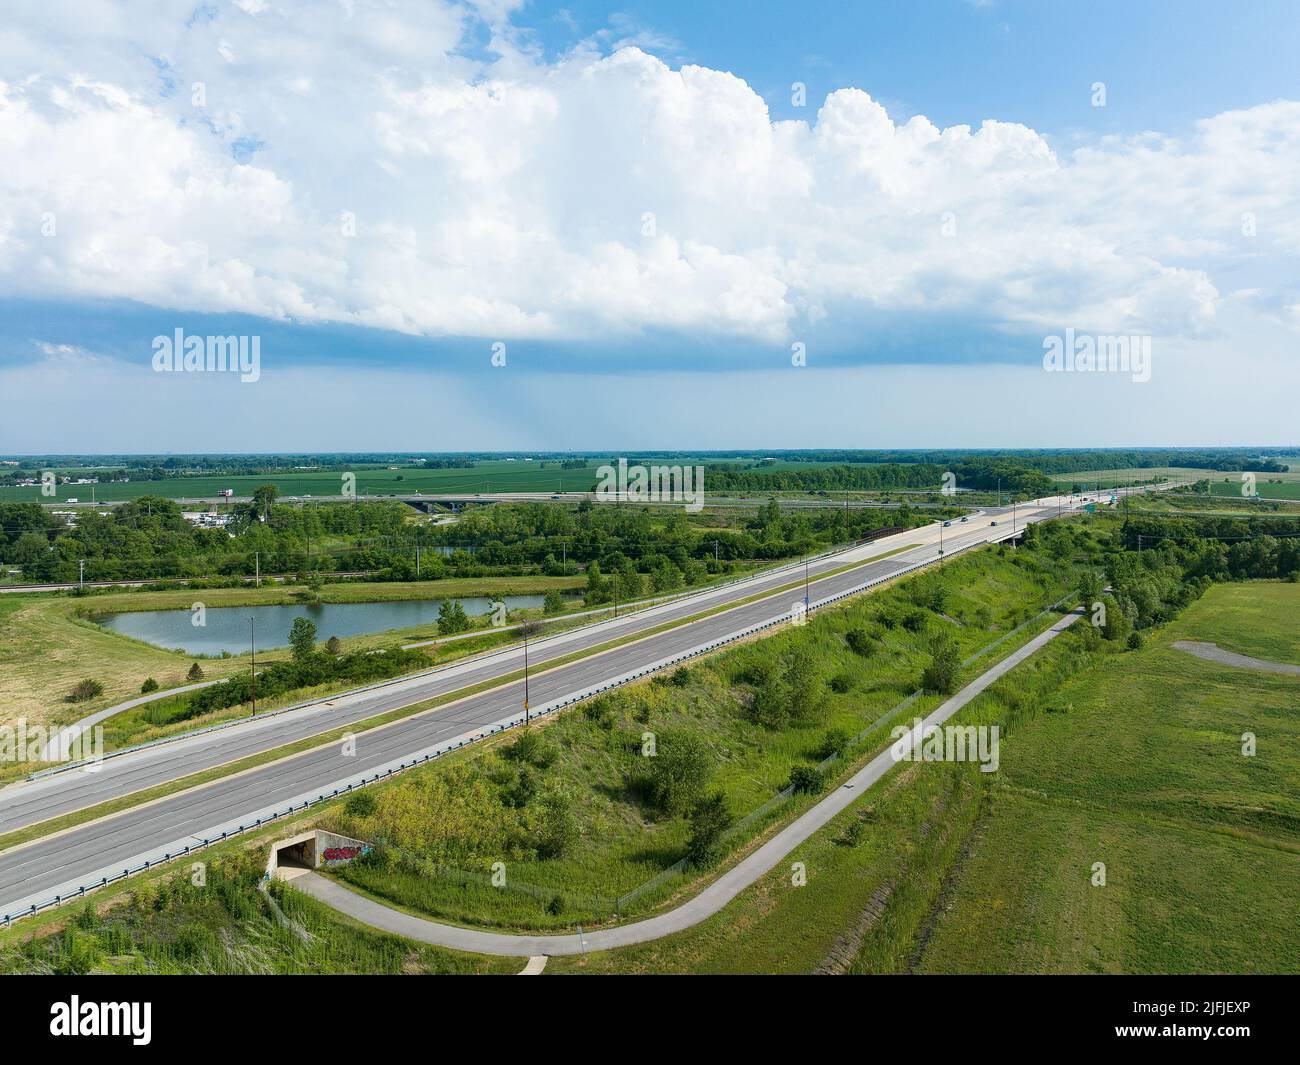 Aerial view of highway Stock Photo